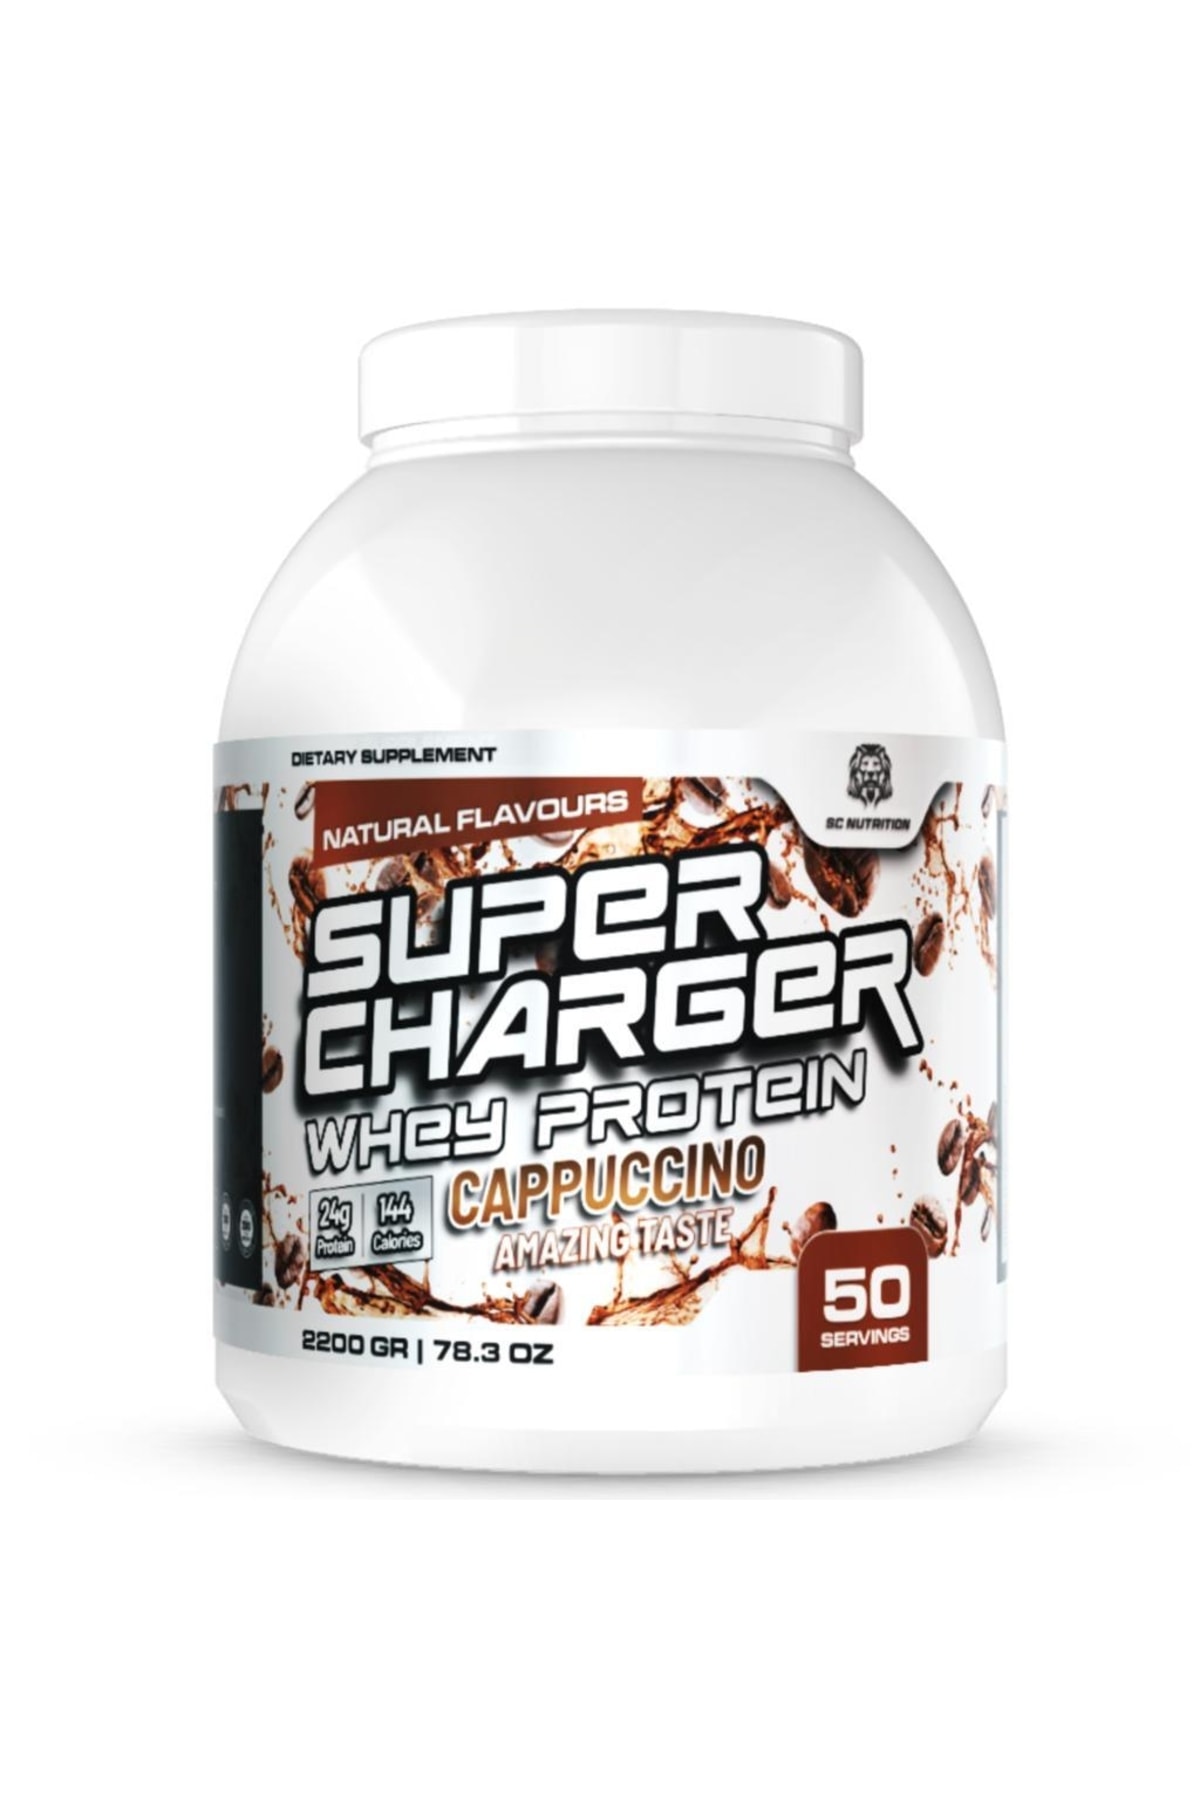 scnutrition Sc Nutrition Super Charger Whey Protein Cappuccınno